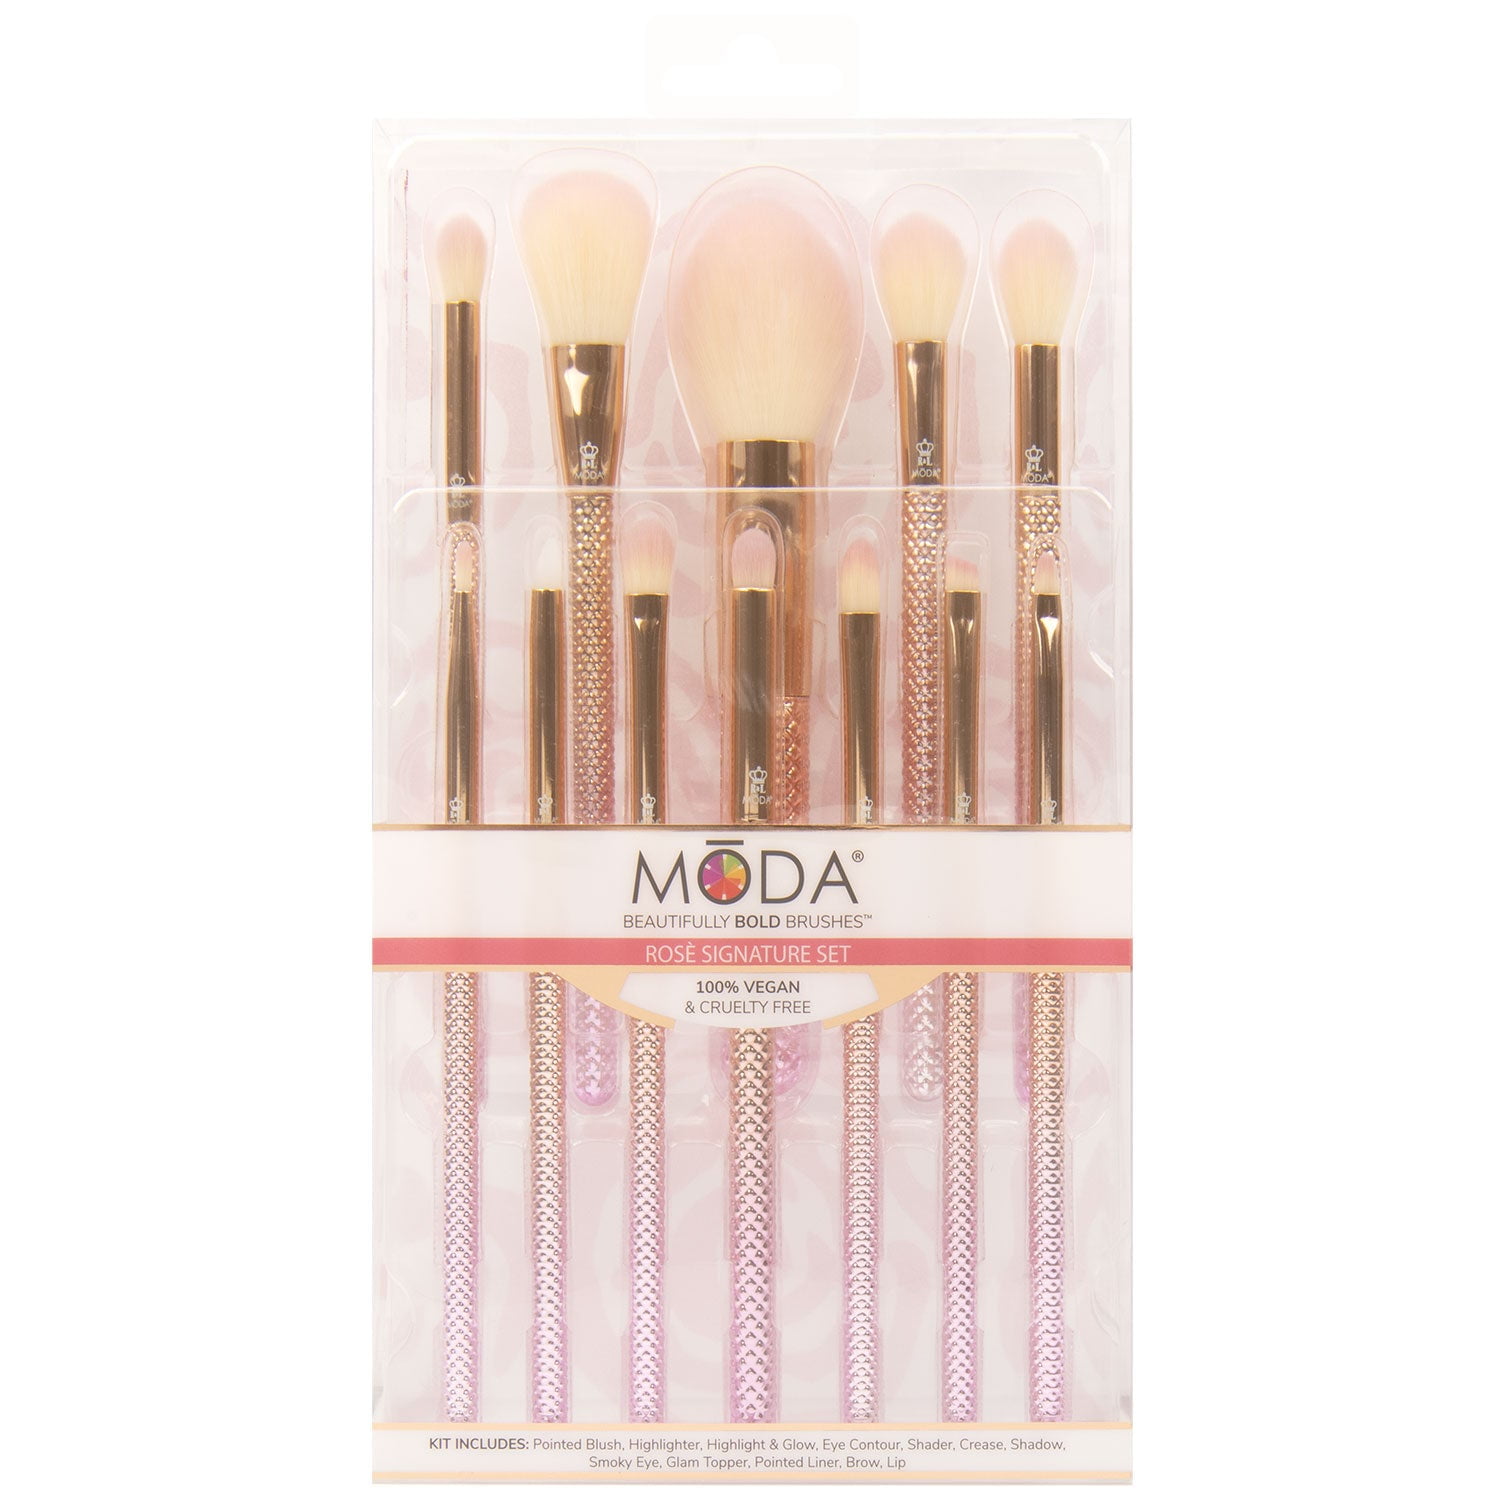 Luxie Beauty Collection Rose Gold Brush Set 12pc - Rose gold - 516 requests